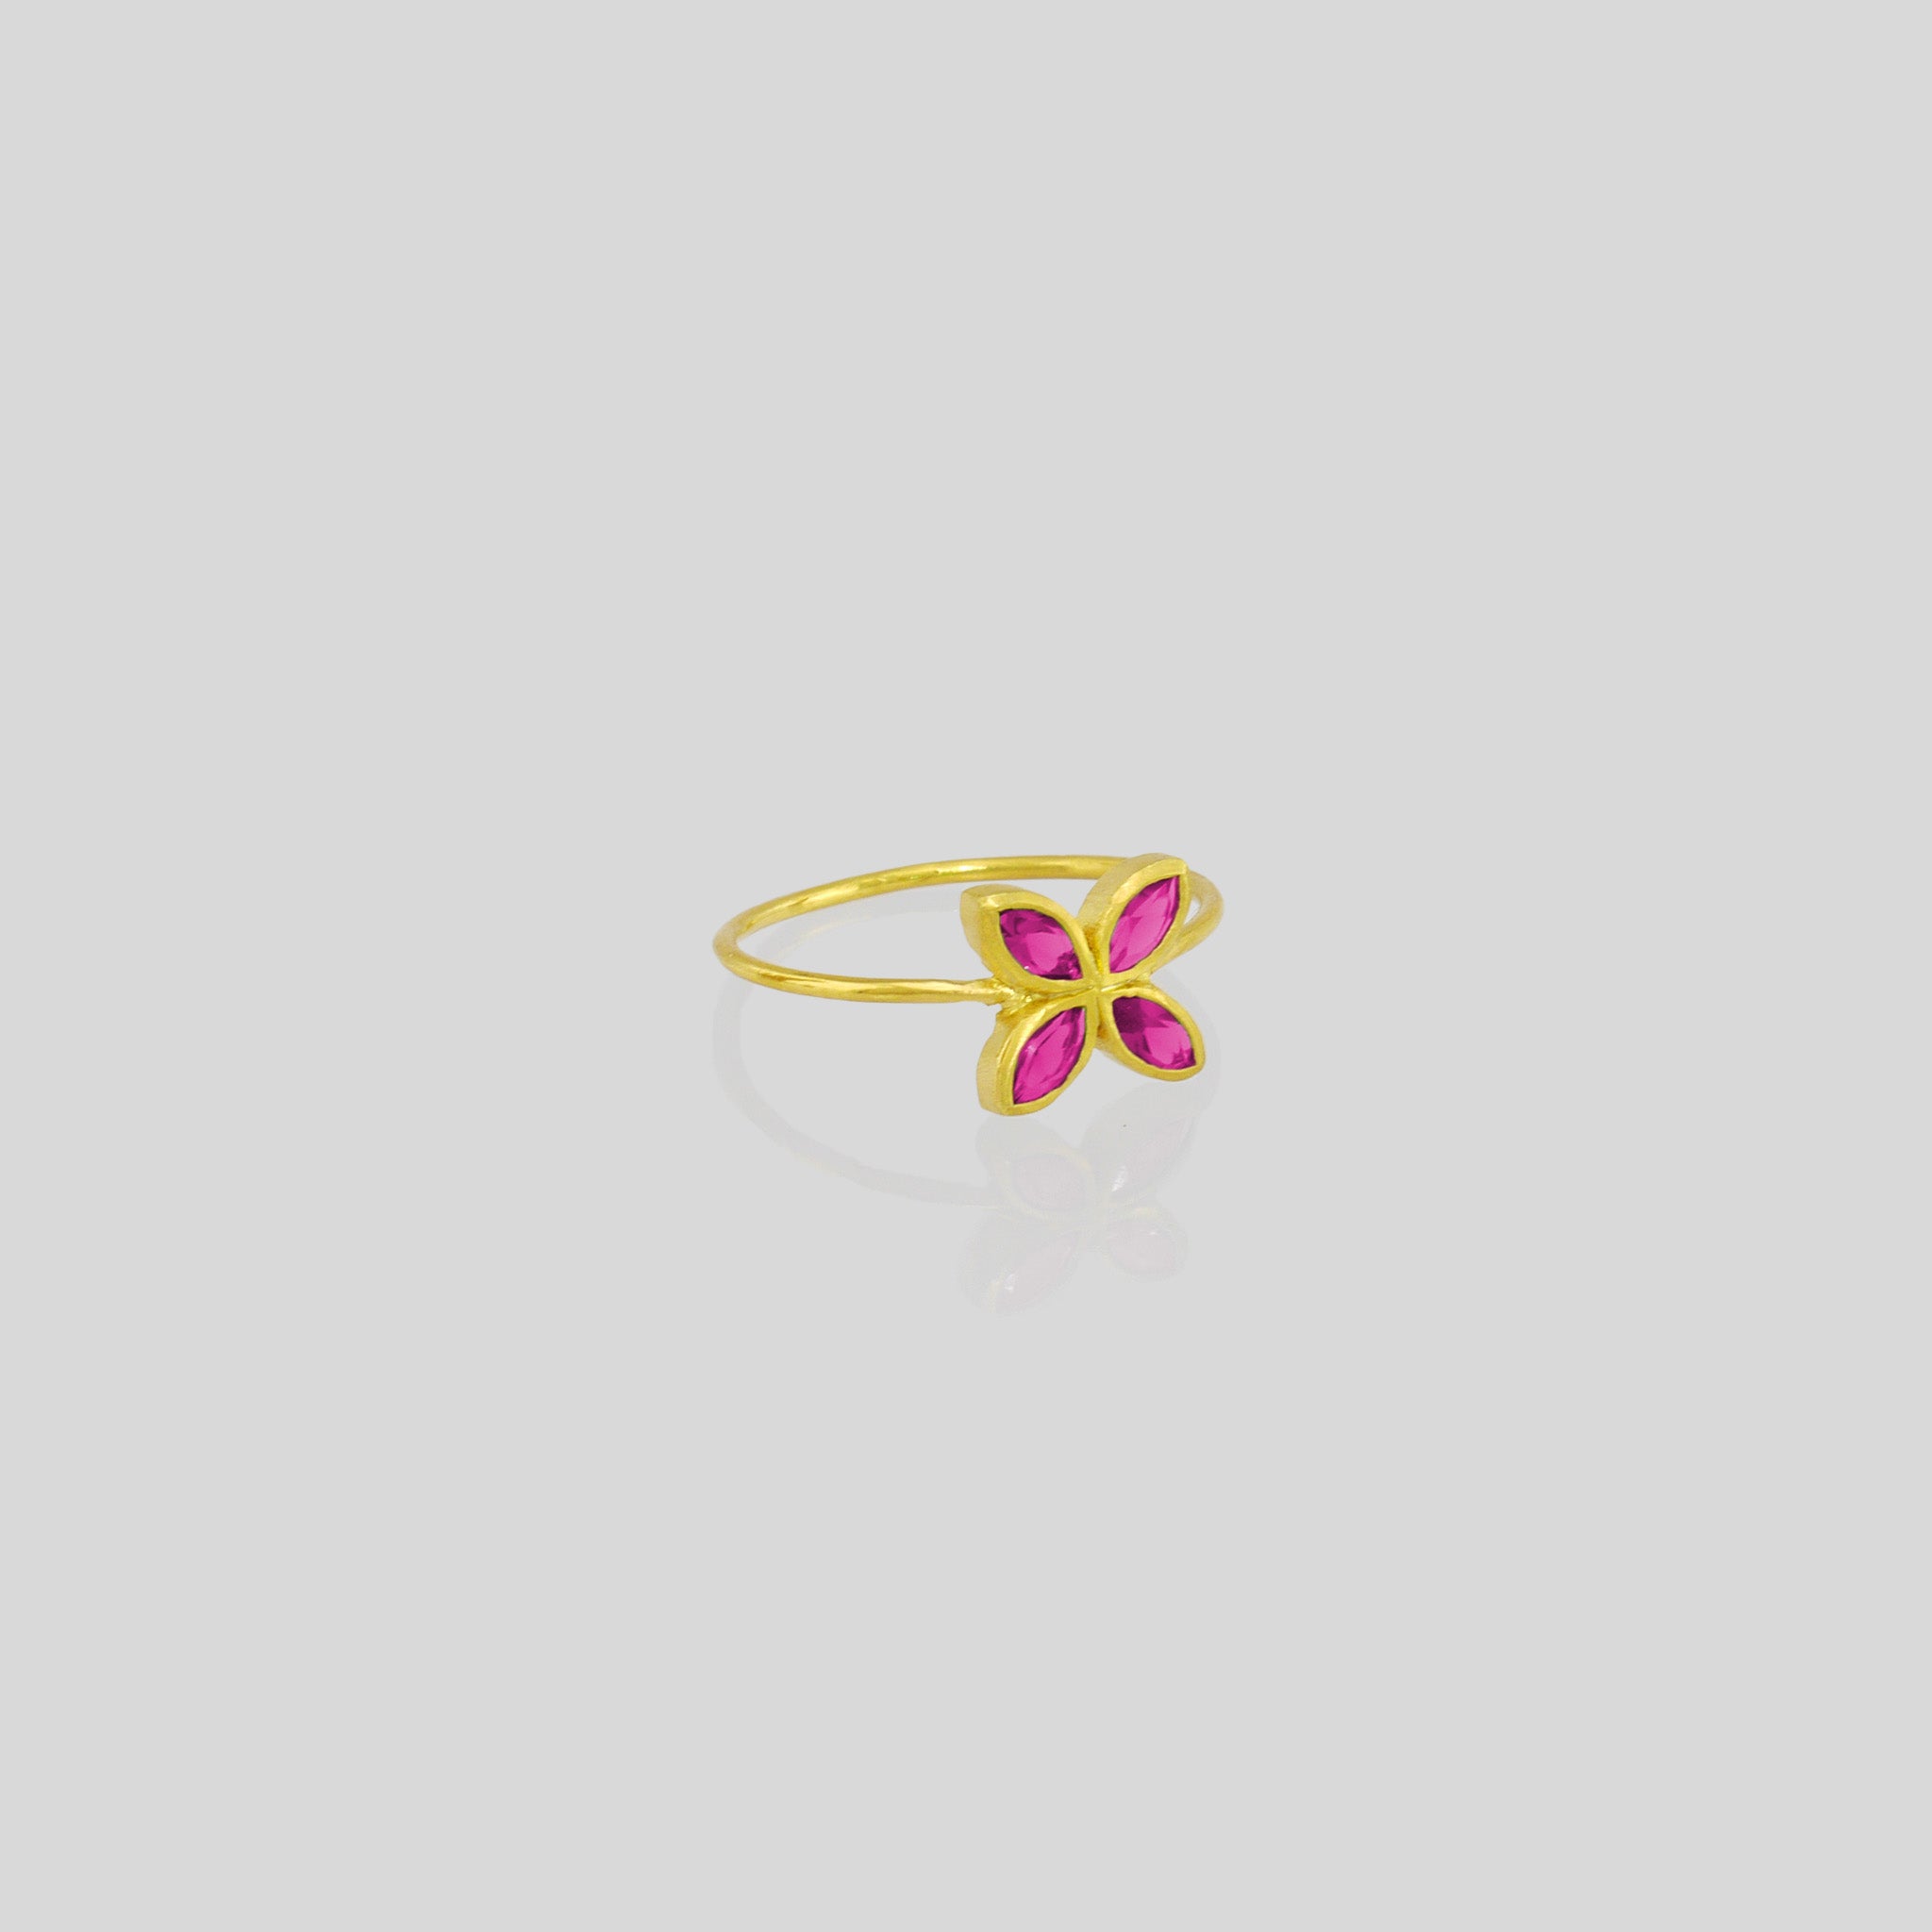 Delicate Gold ring with Ruby marquise in a flower-shaped design. Radiant and cheerful addition to any collection.